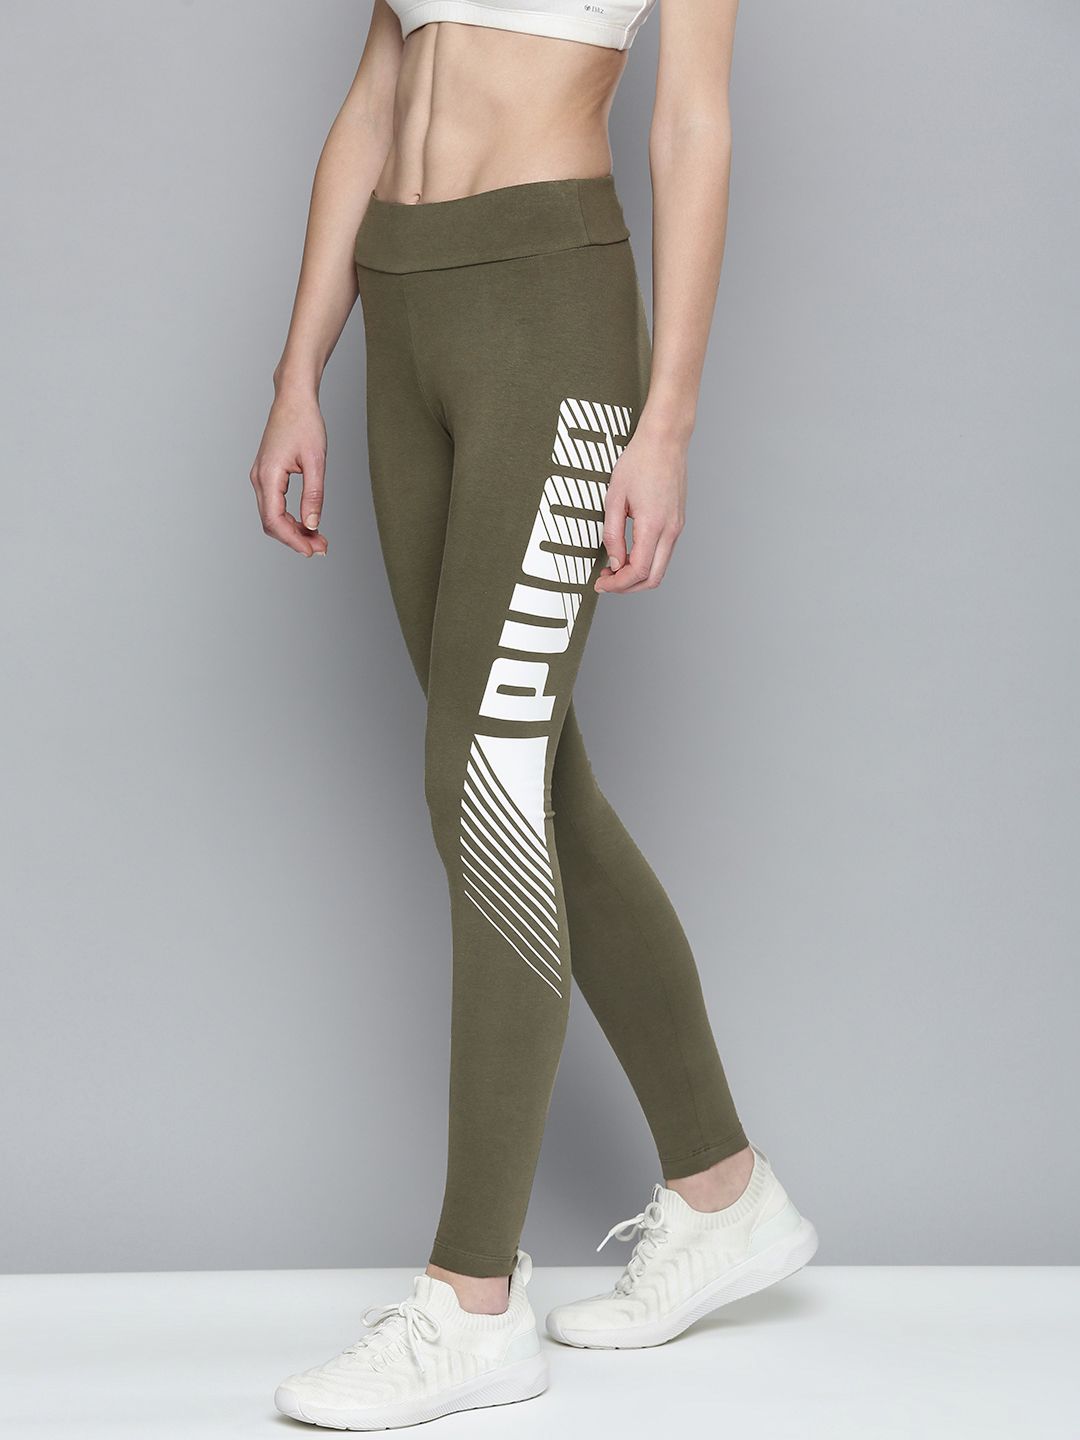 Puma Women Olive Green Printed Slim Fit Tights Price in India